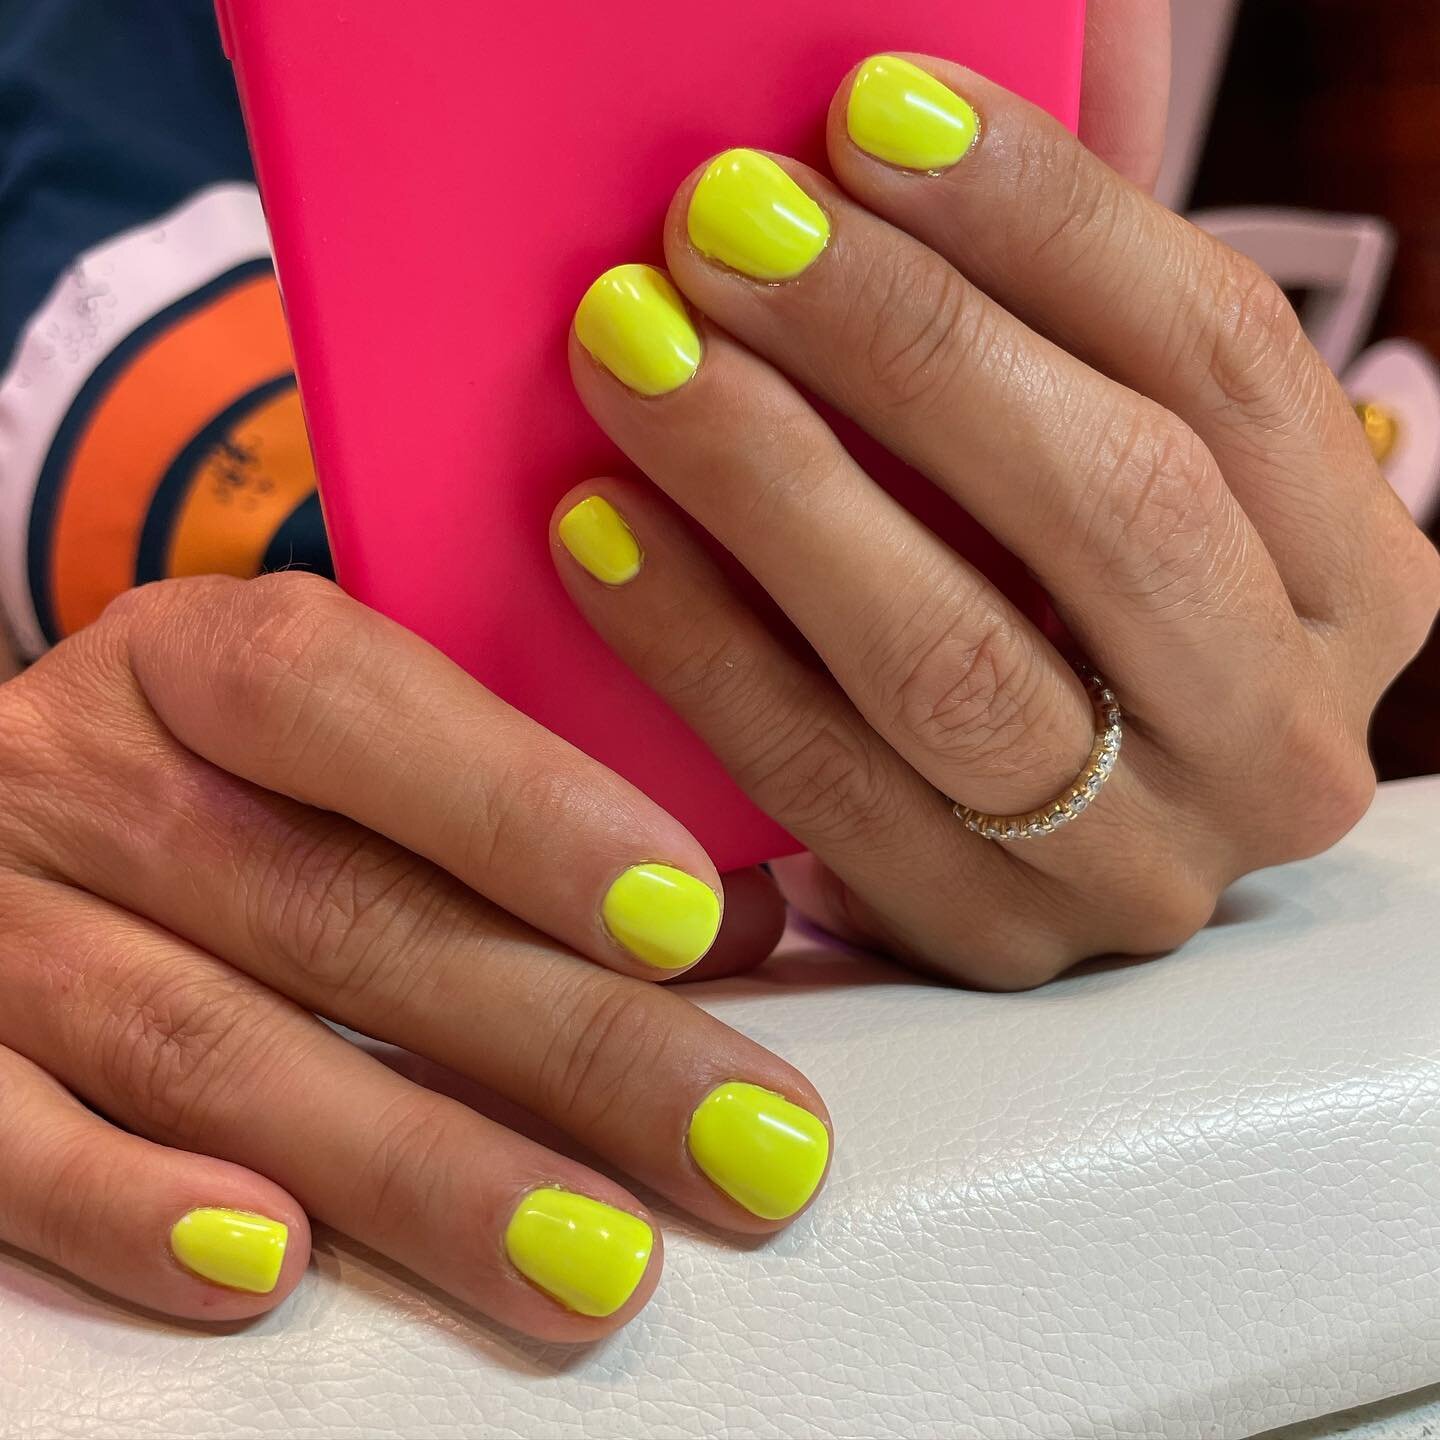 &ldquo;Sorry I missed your call, I was getting my nails done. 💁🏻&zwj;♀️&rdquo; 

#09NailStudio #NailsBySkarlett  #sanantoniotx #nailtech #girlboss #bossbabe #smallbusiness #owner #natural #nails #only #nailcare #gel #manicure #polishgirl #gelnails 